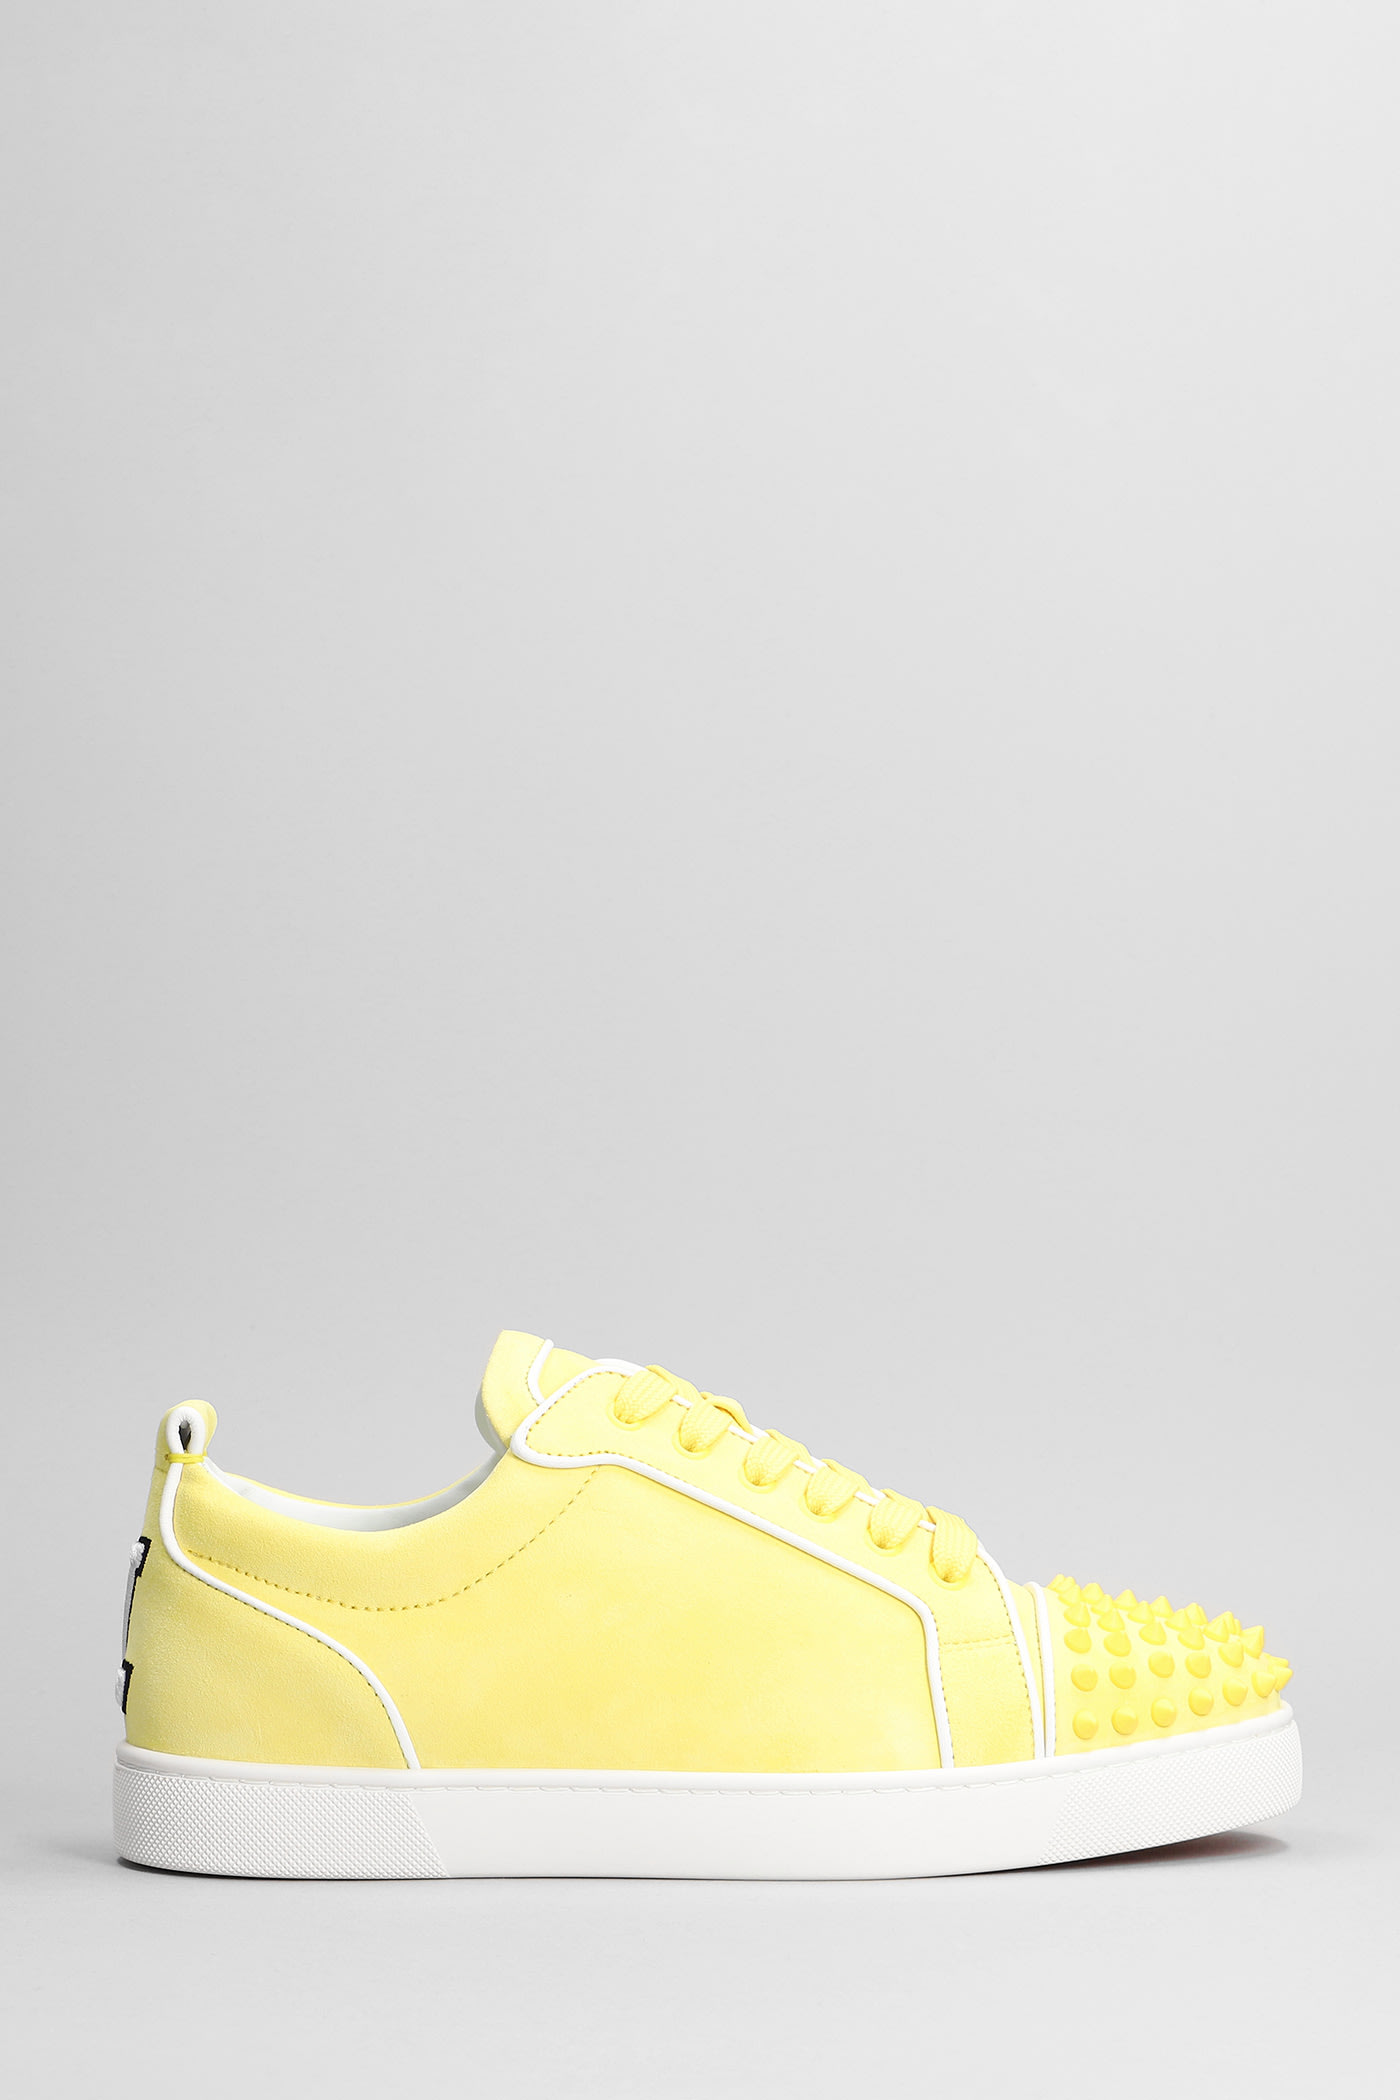 Christian Louboutin Varsi Junior Spikes Sneakers In Yellow Suede